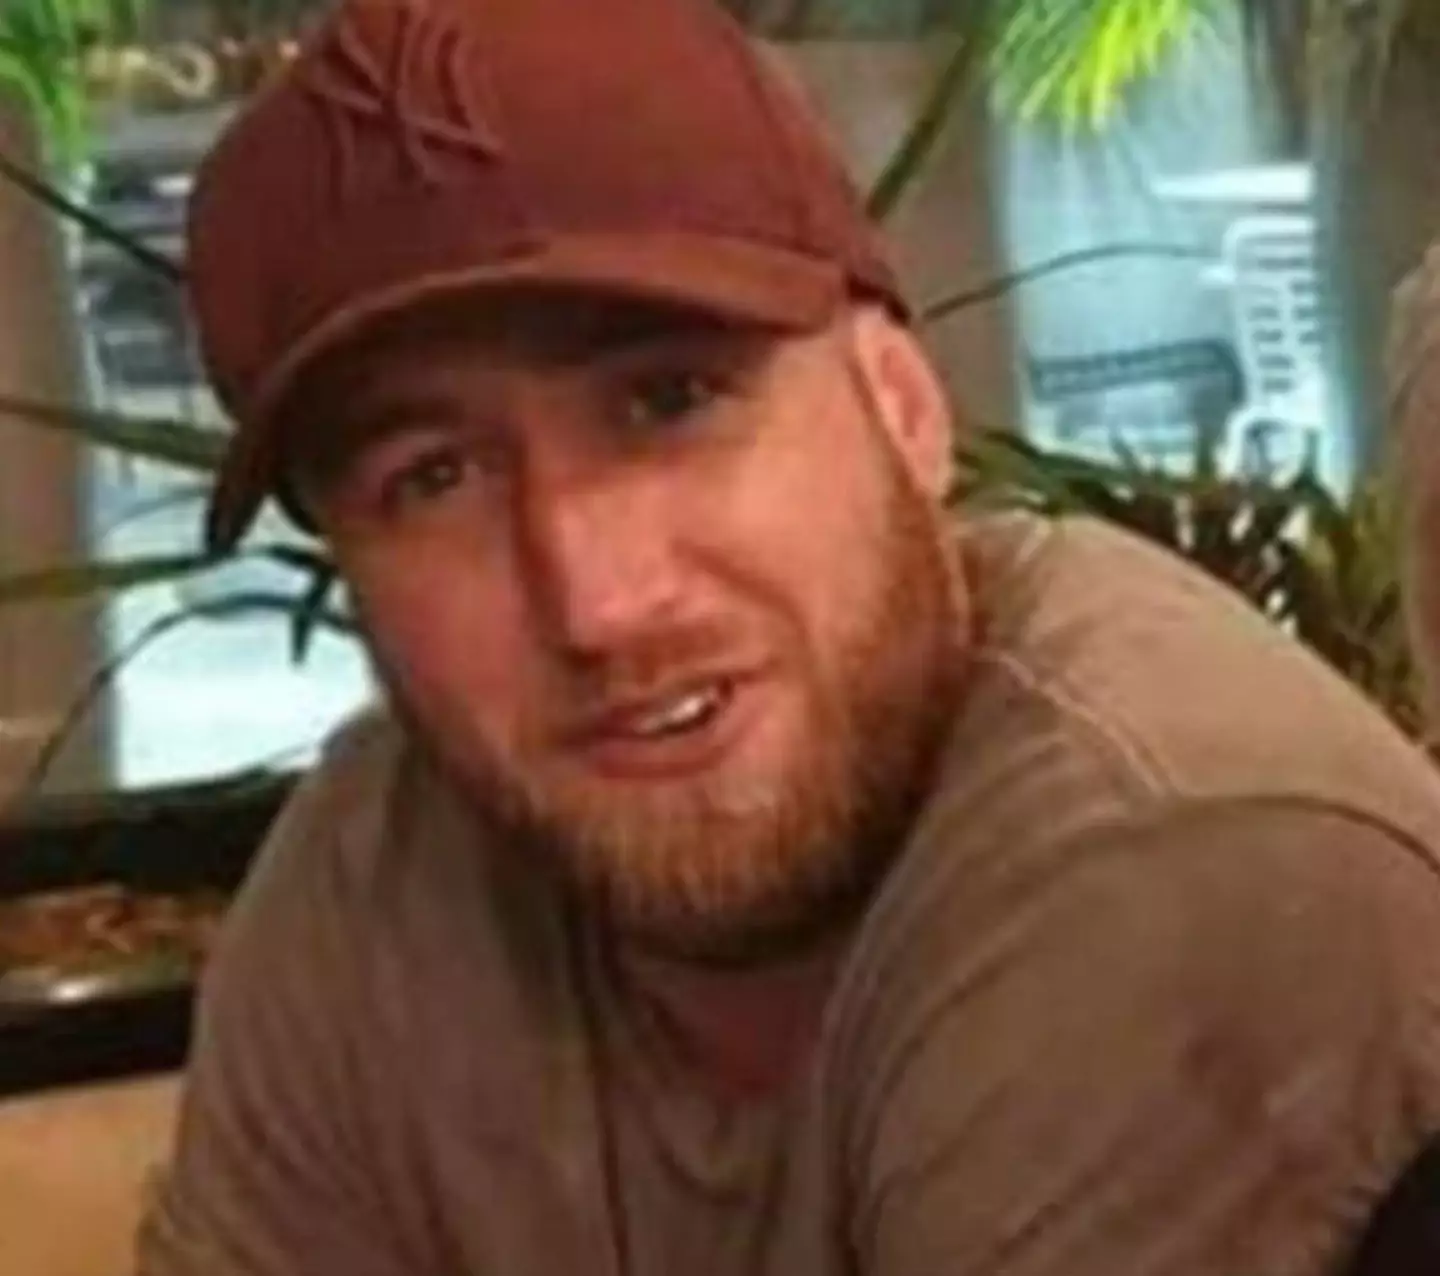 Tyler King previously pleaded guilty to the manslaughter of Jesse Tattersall (pictured). (7News)